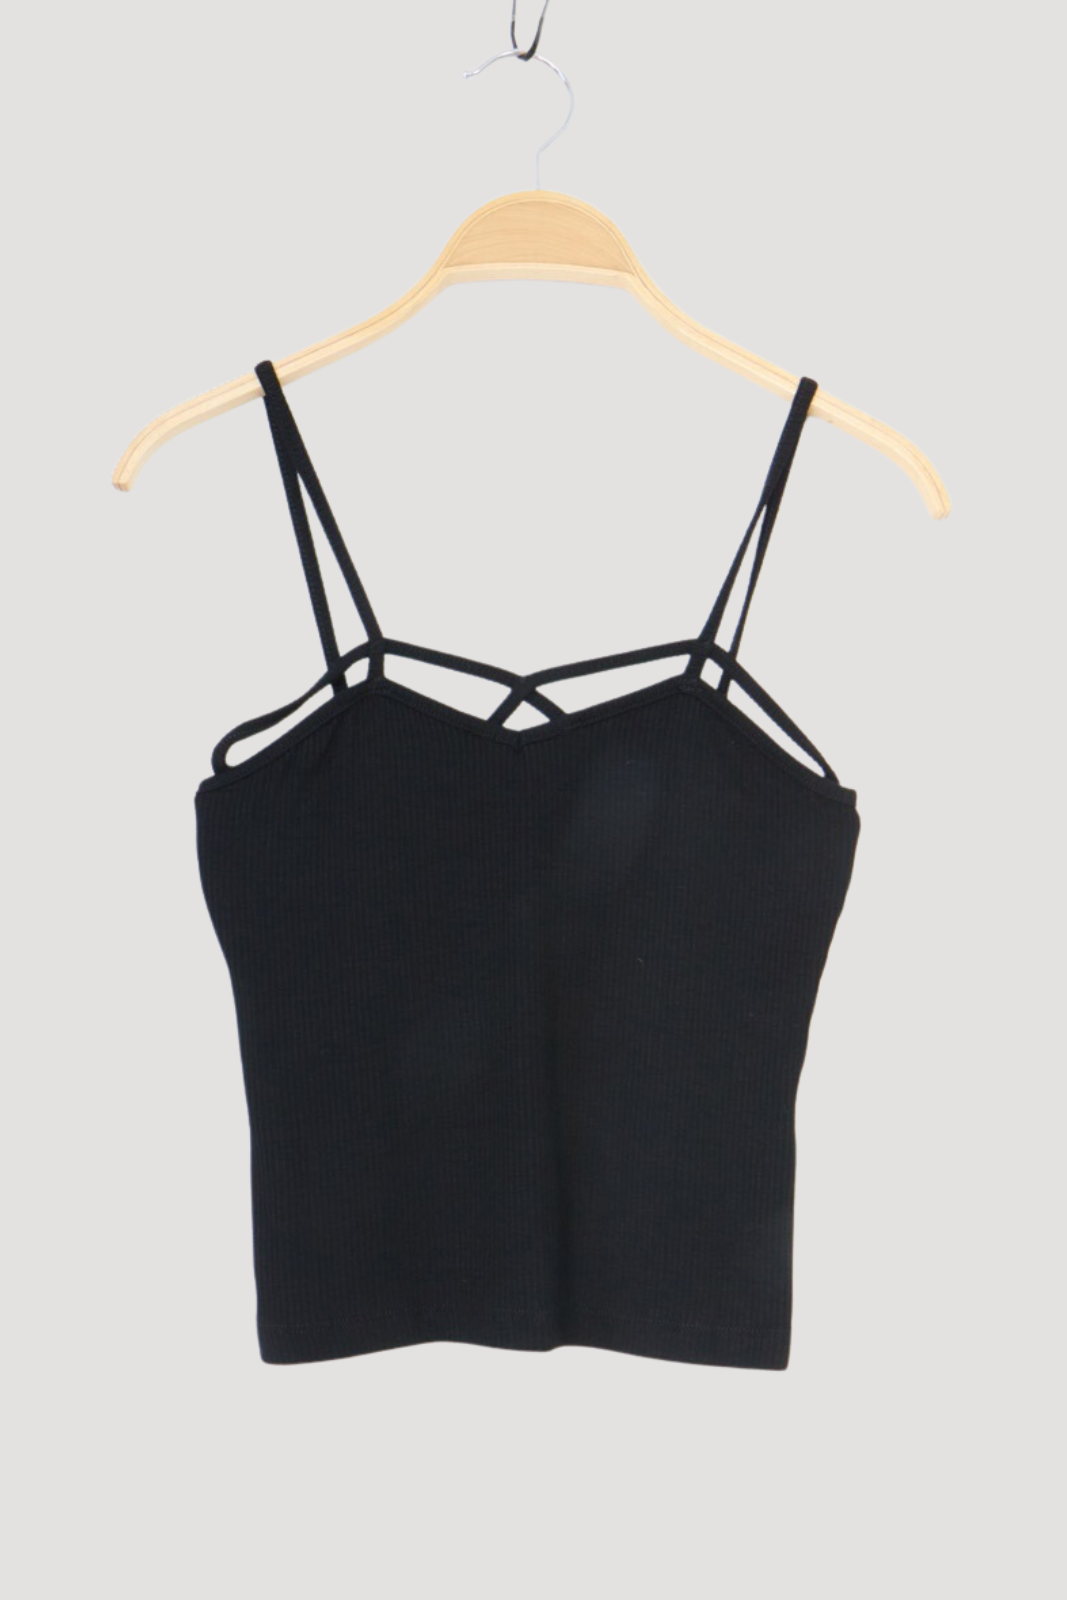 Obsidian Strapped Top